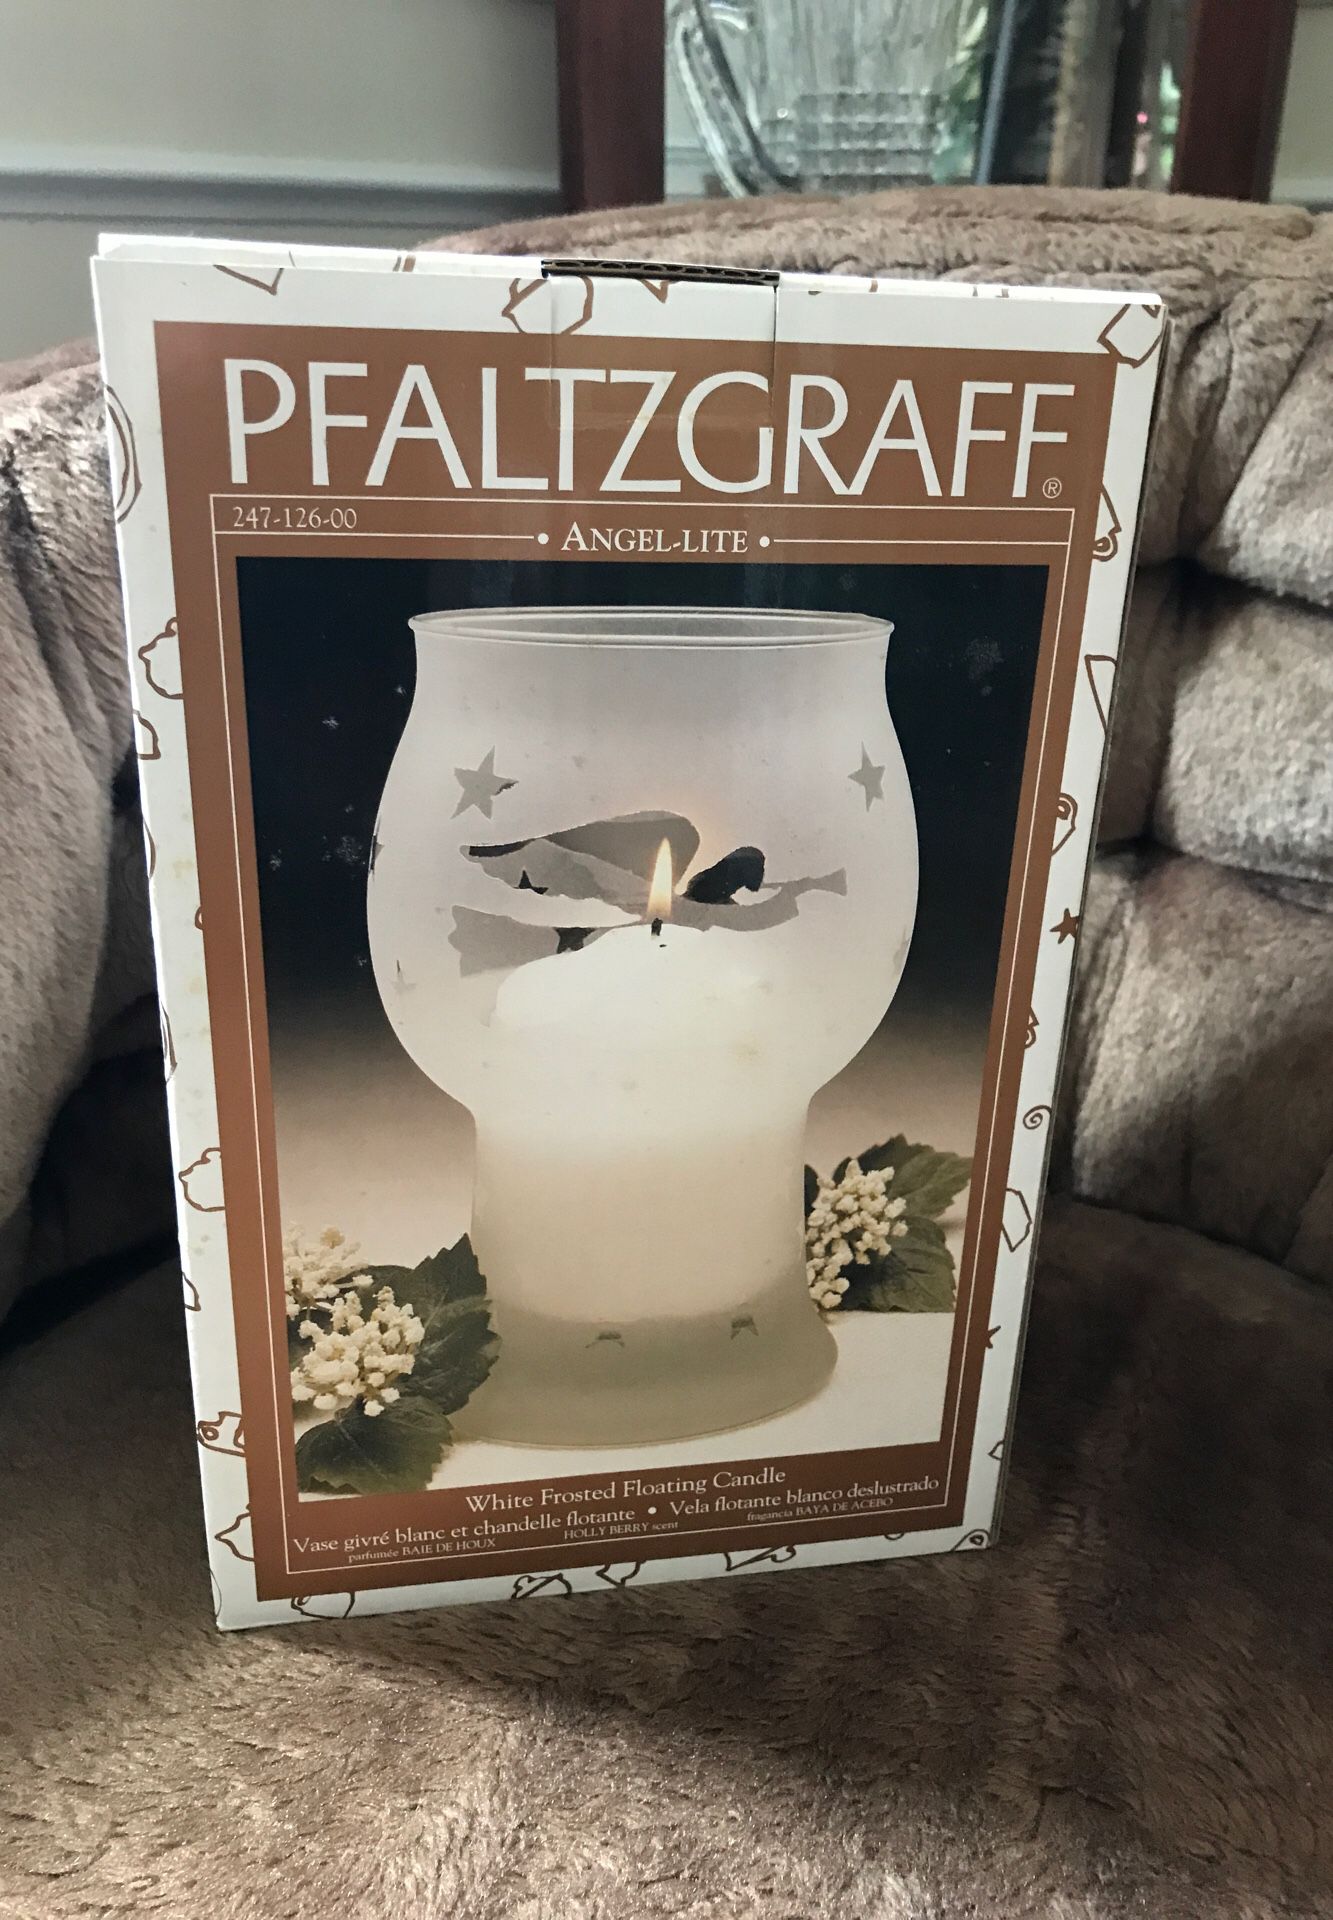 Pfaltzgraff white frosted floating candle